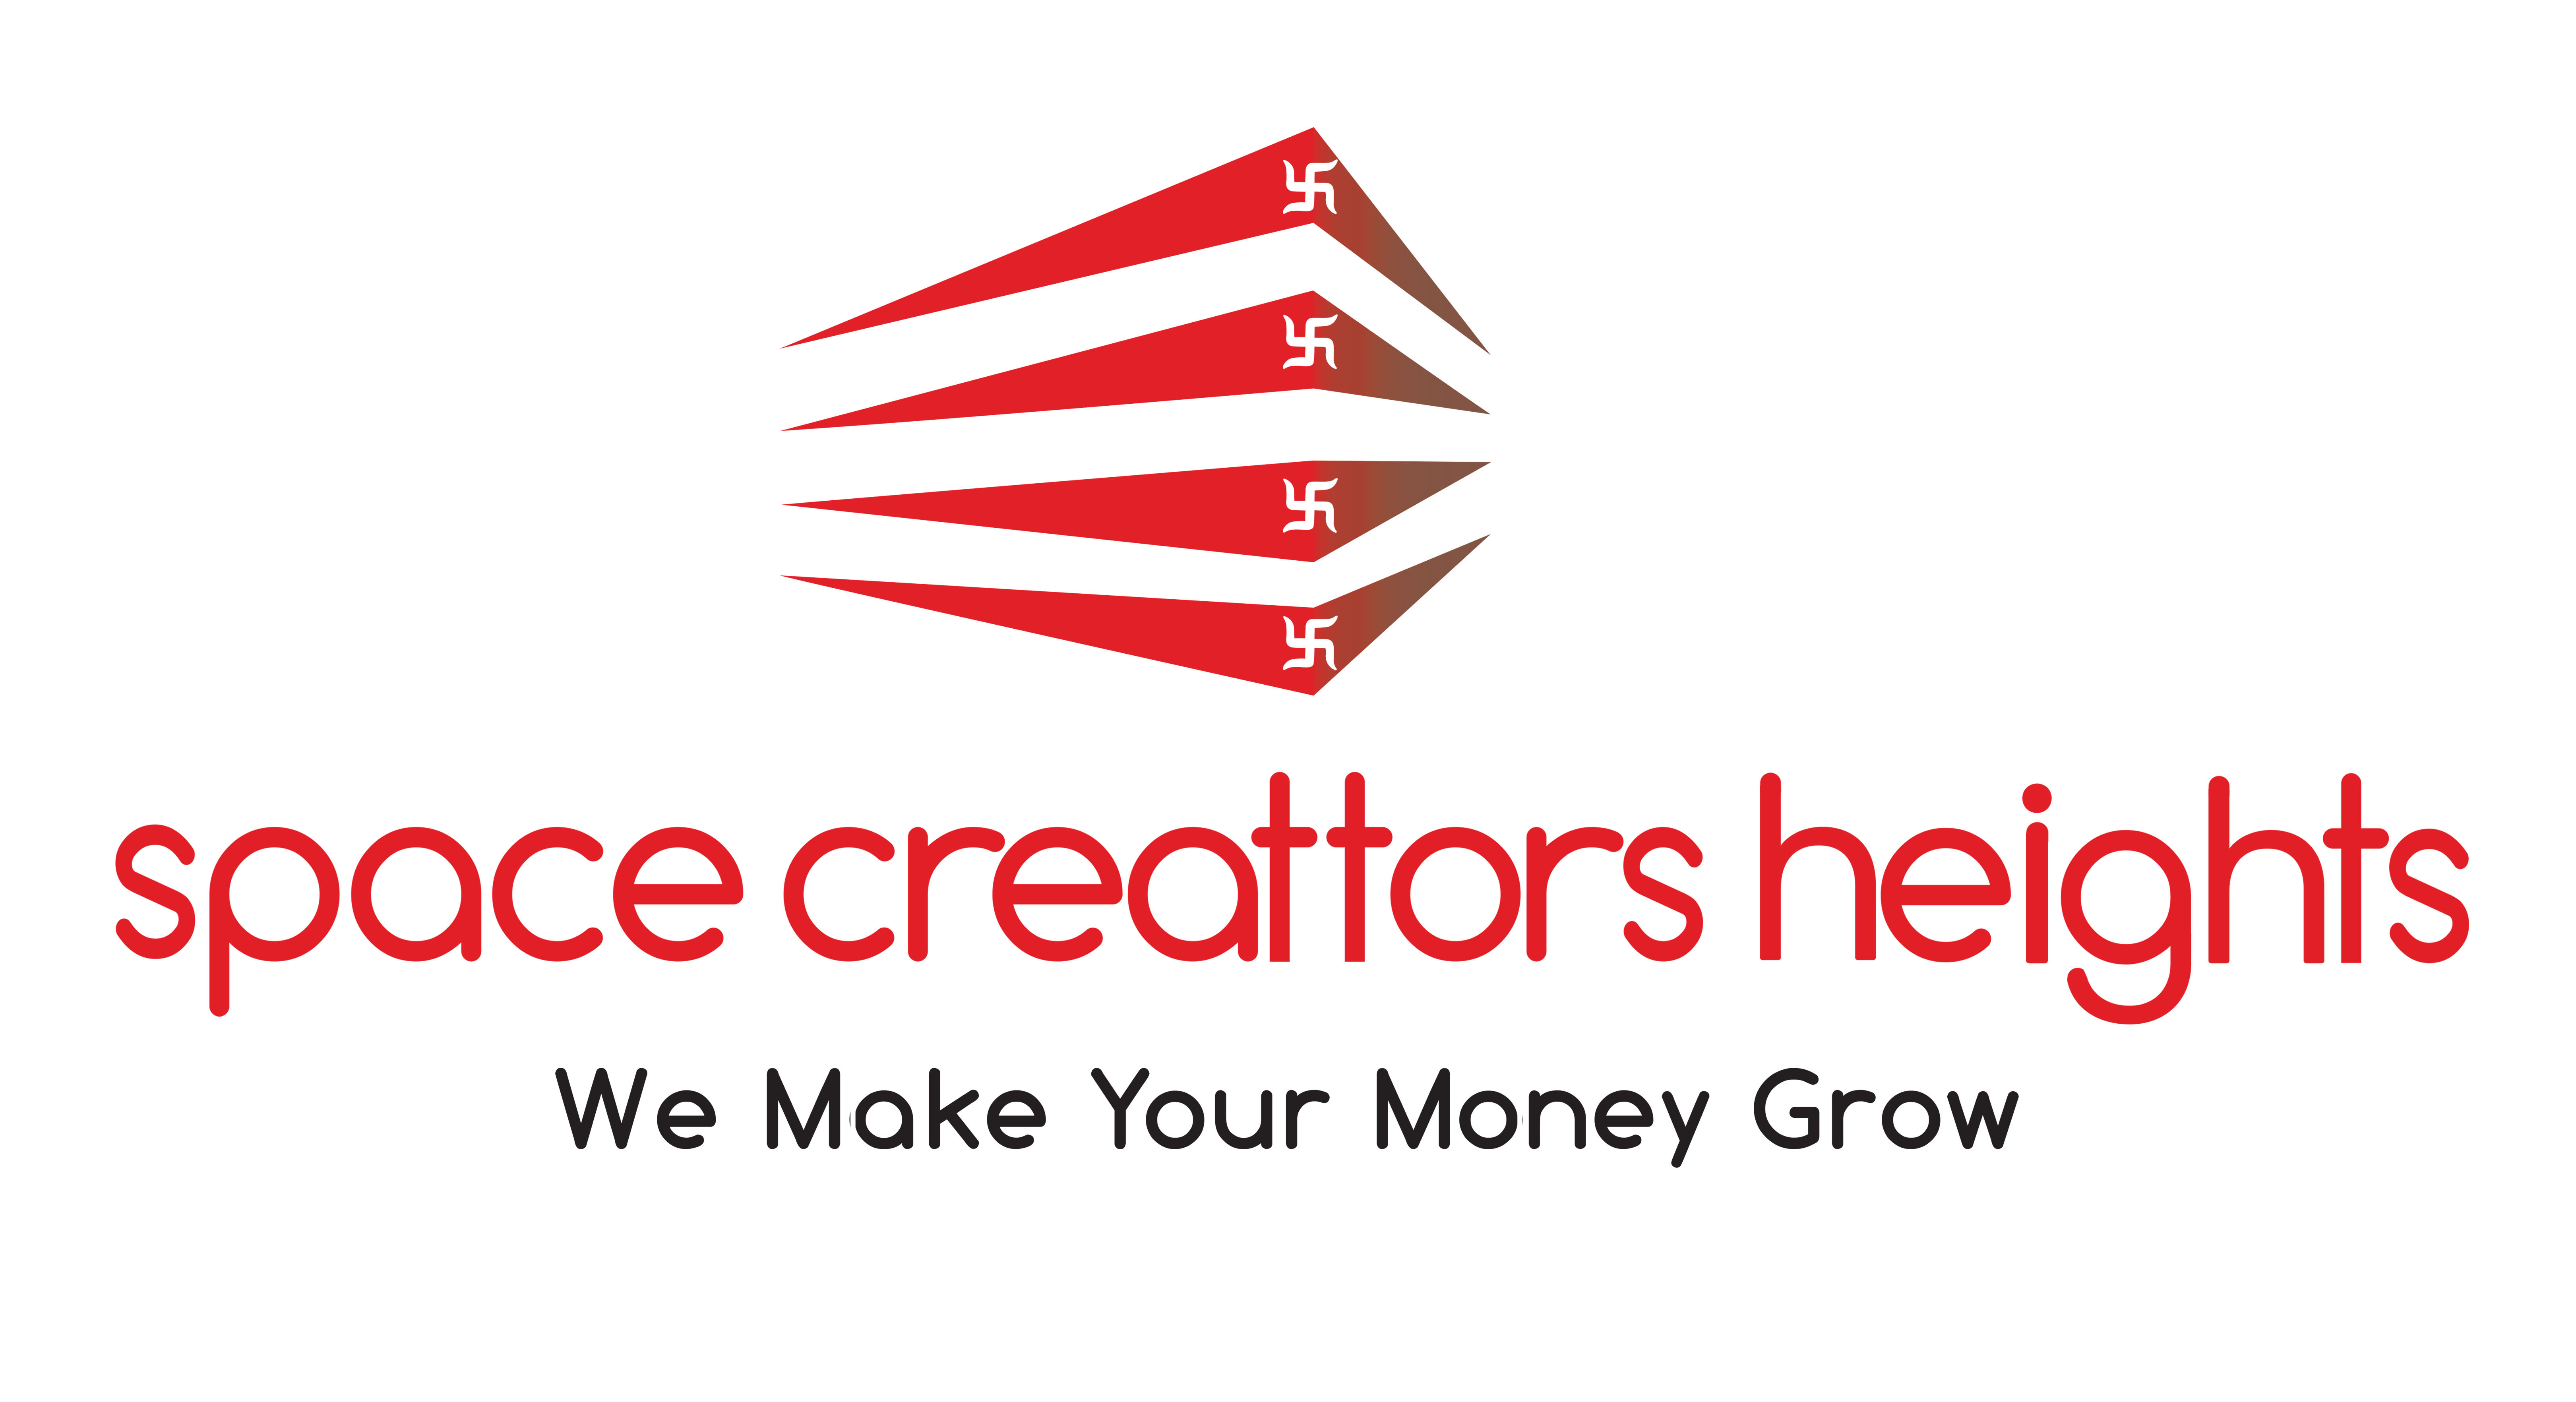 Luxury Real Estate Service Provider Space Creattors Releases New Brand Name & Logo